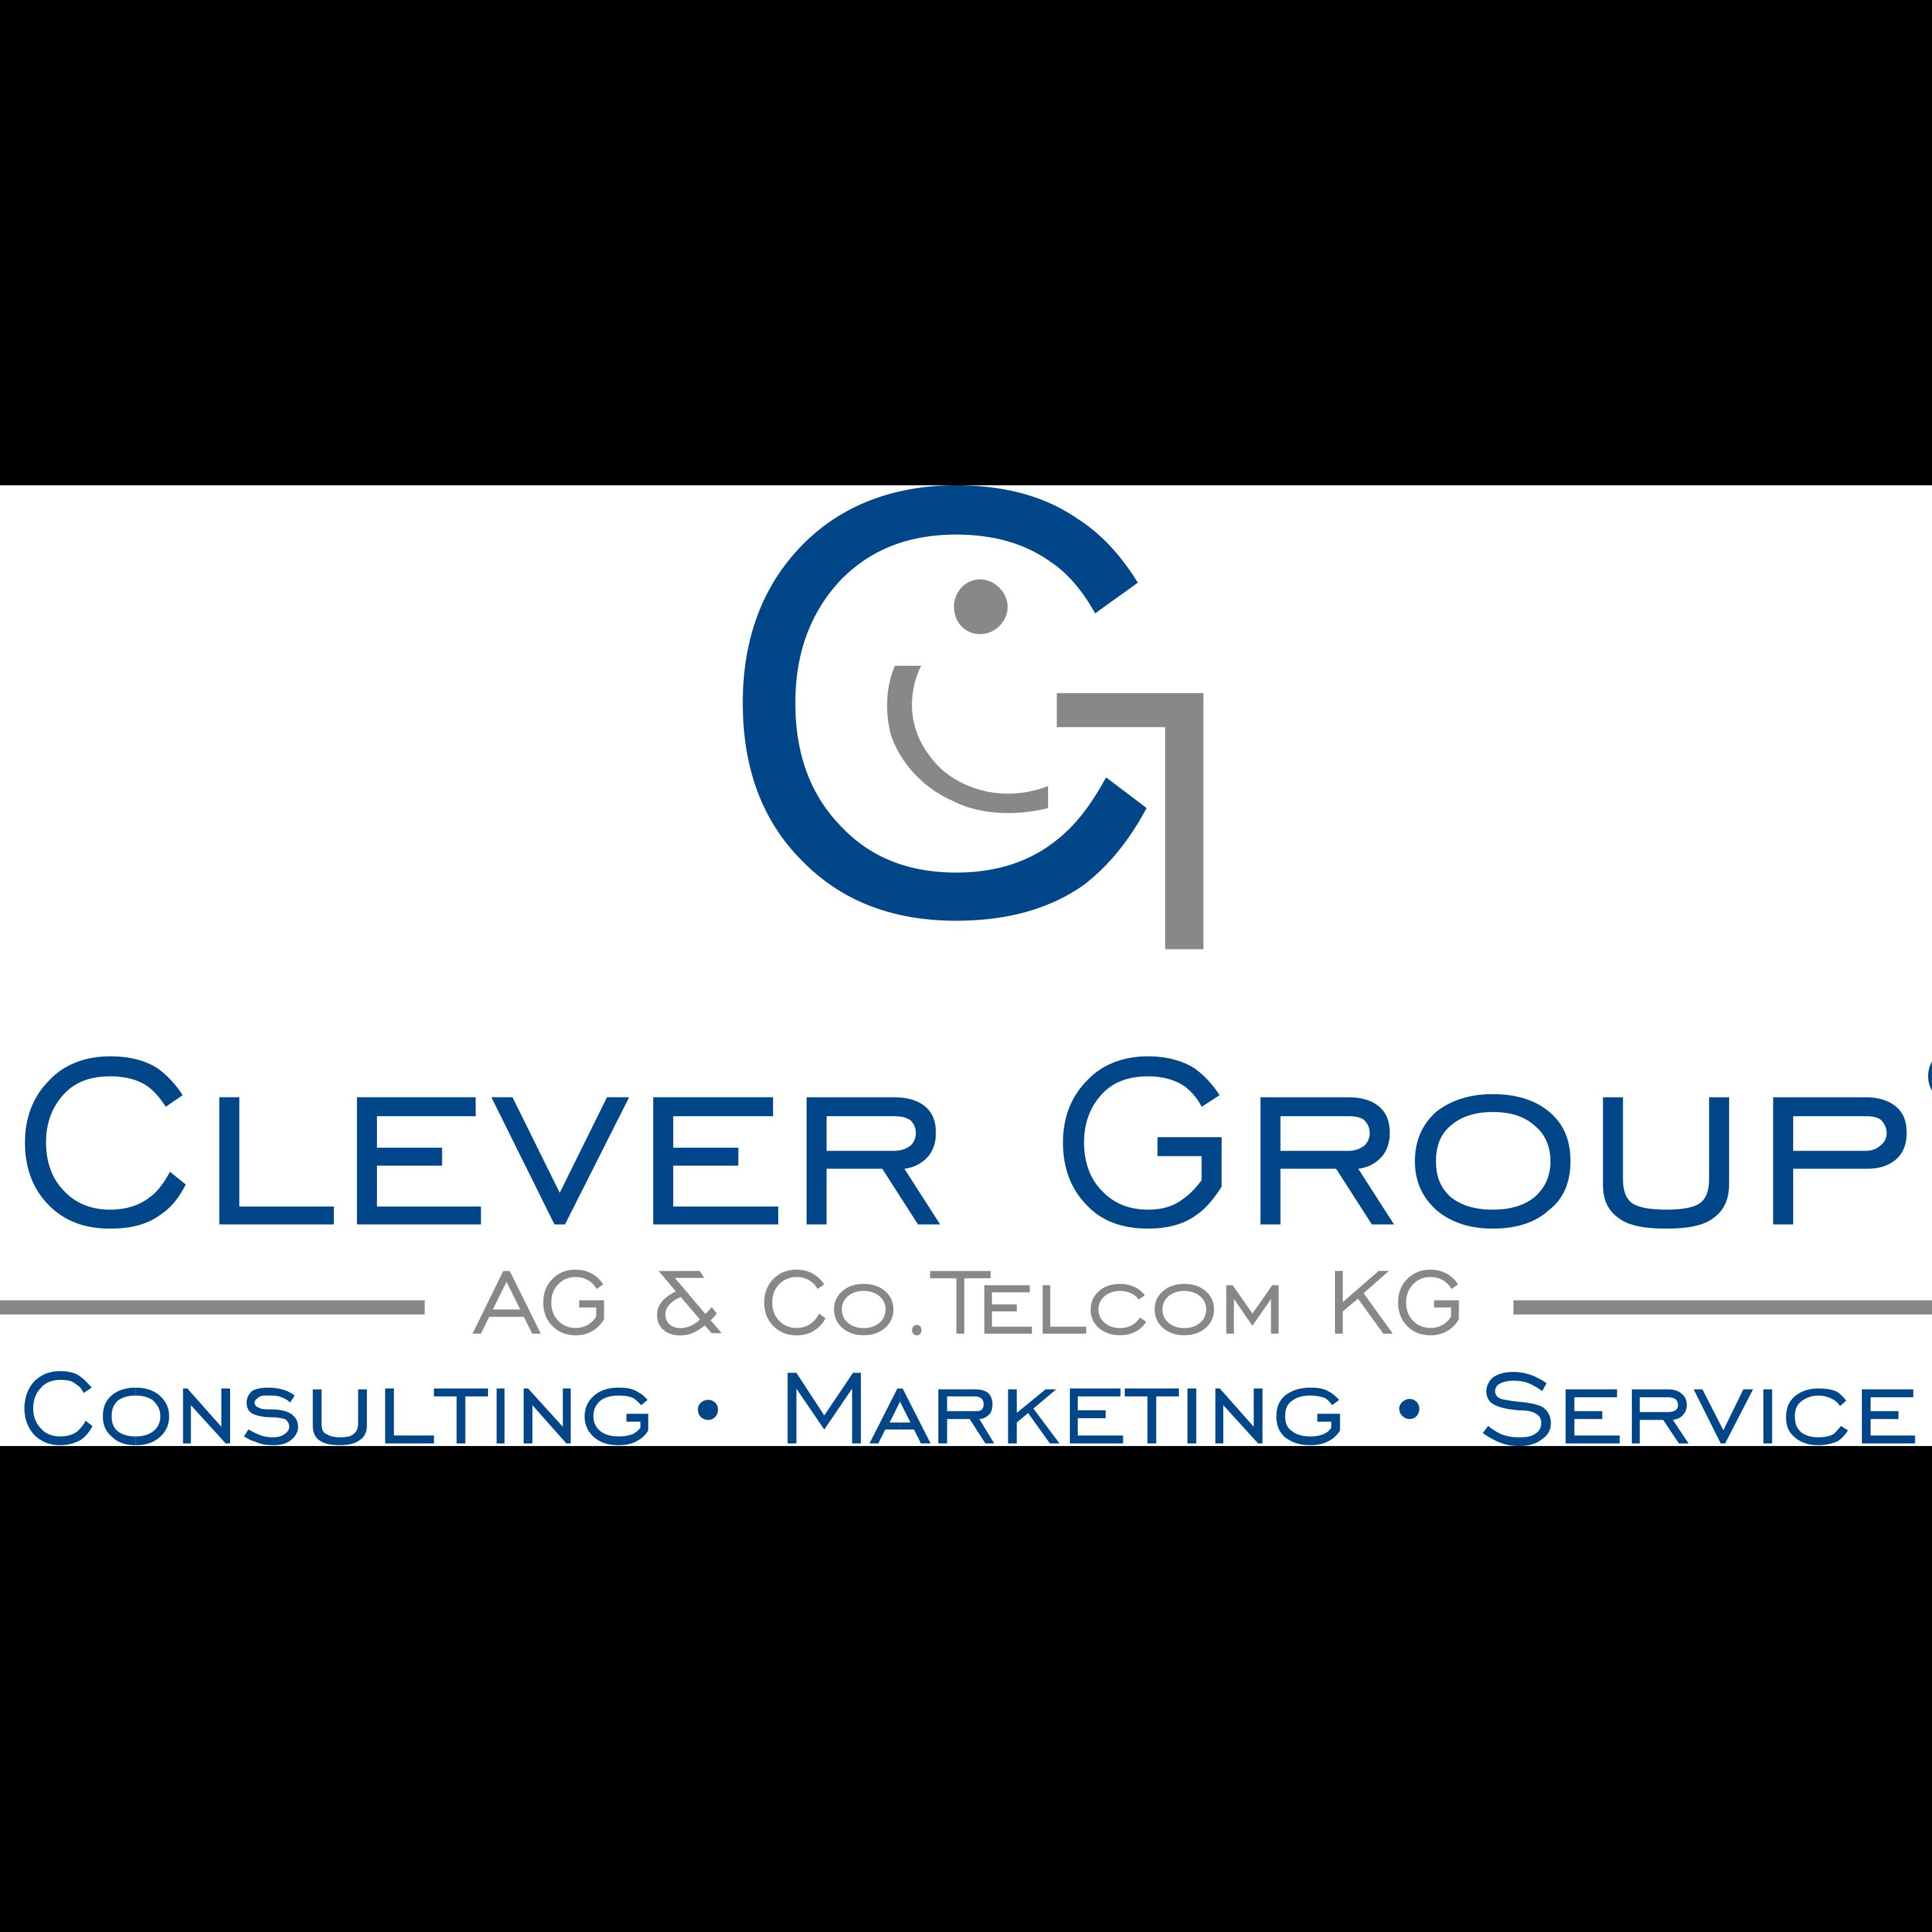 Clever Group AG & Co. Telcom KG